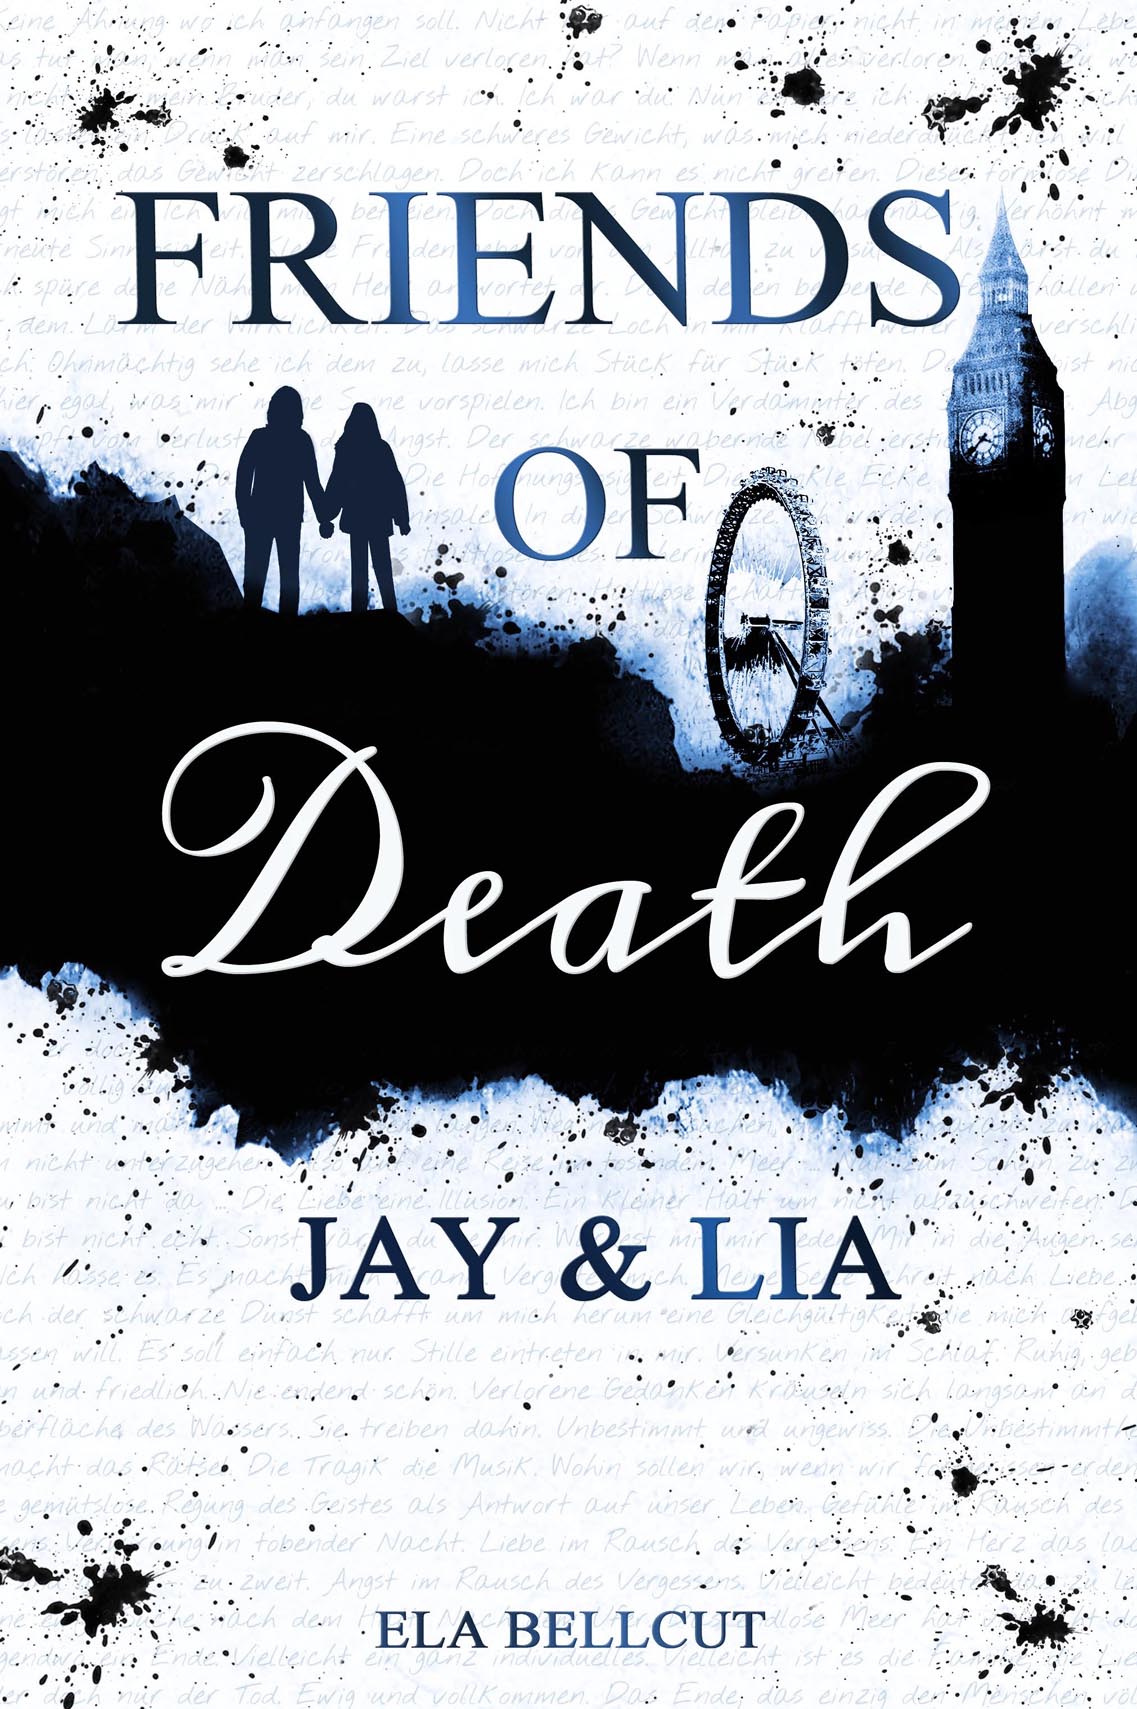 Friends of Death